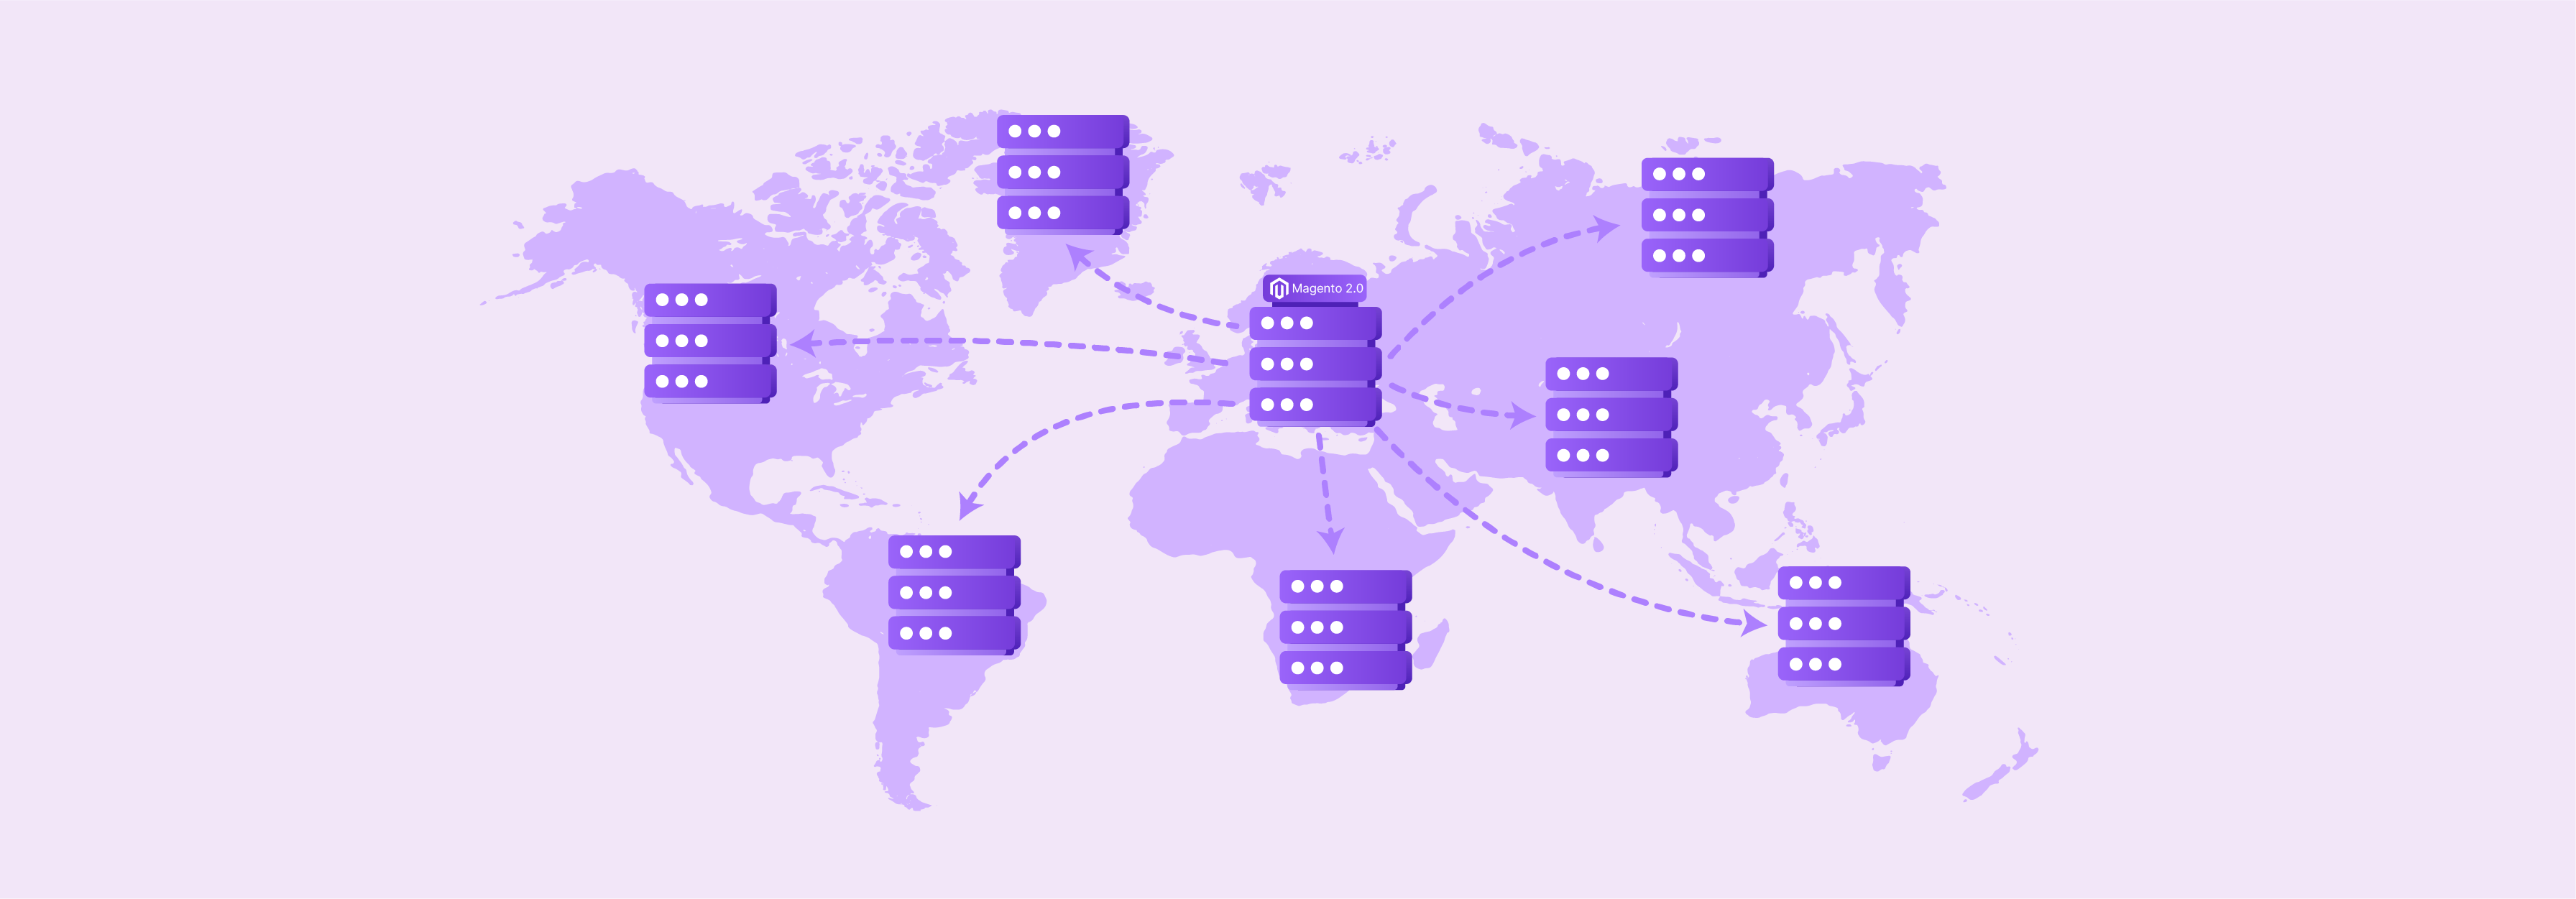 CDN integration for Magento 2.0 hosting ensuring global content delivery and speed